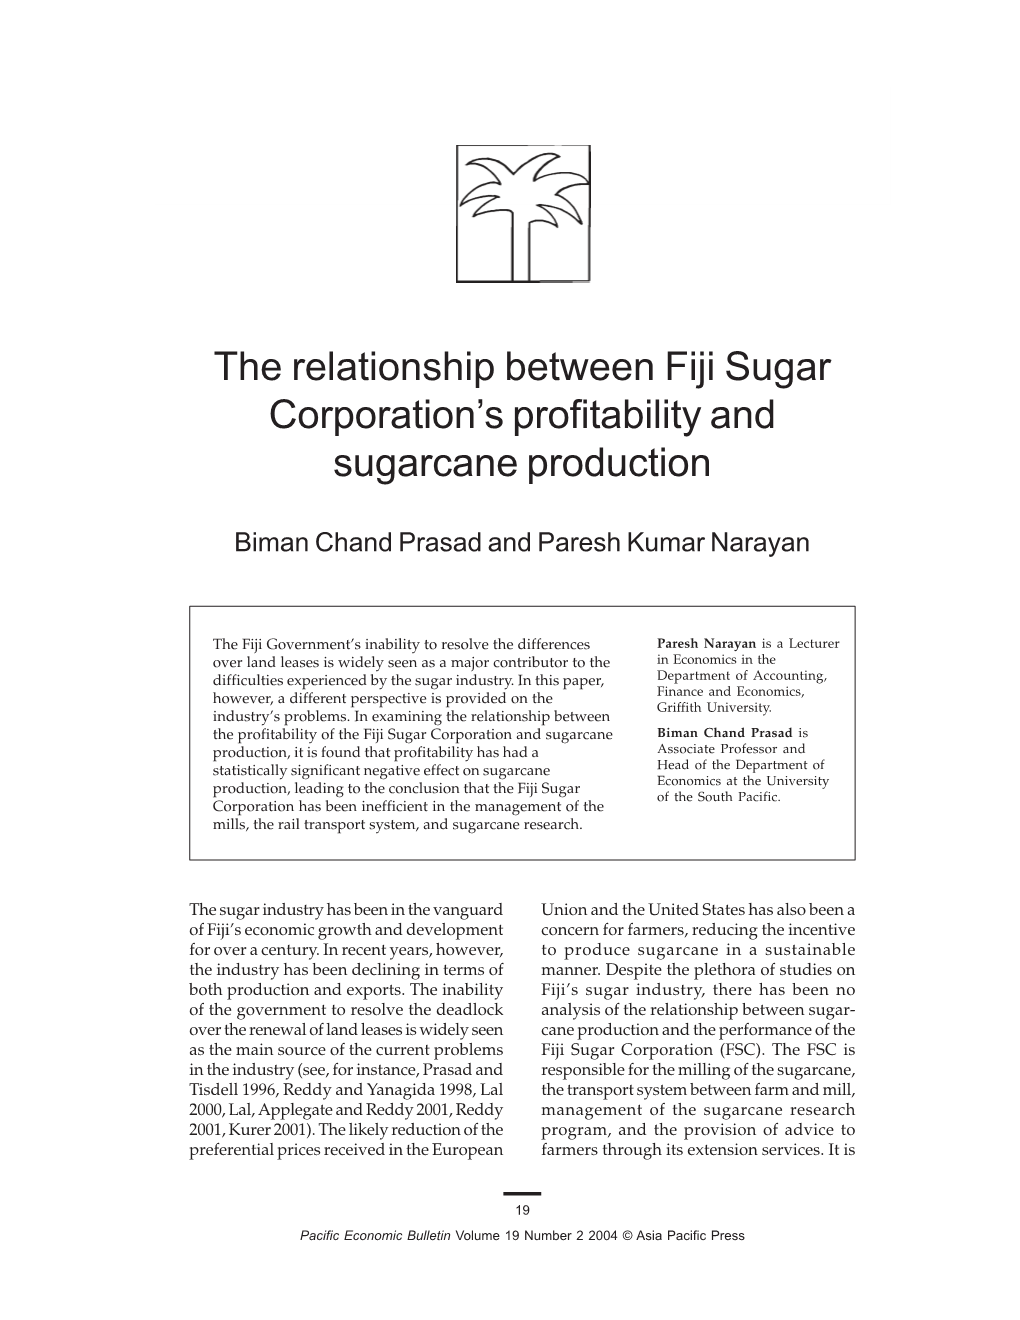 The Relationship Between Fiji Sugar Corporation's Profitability And